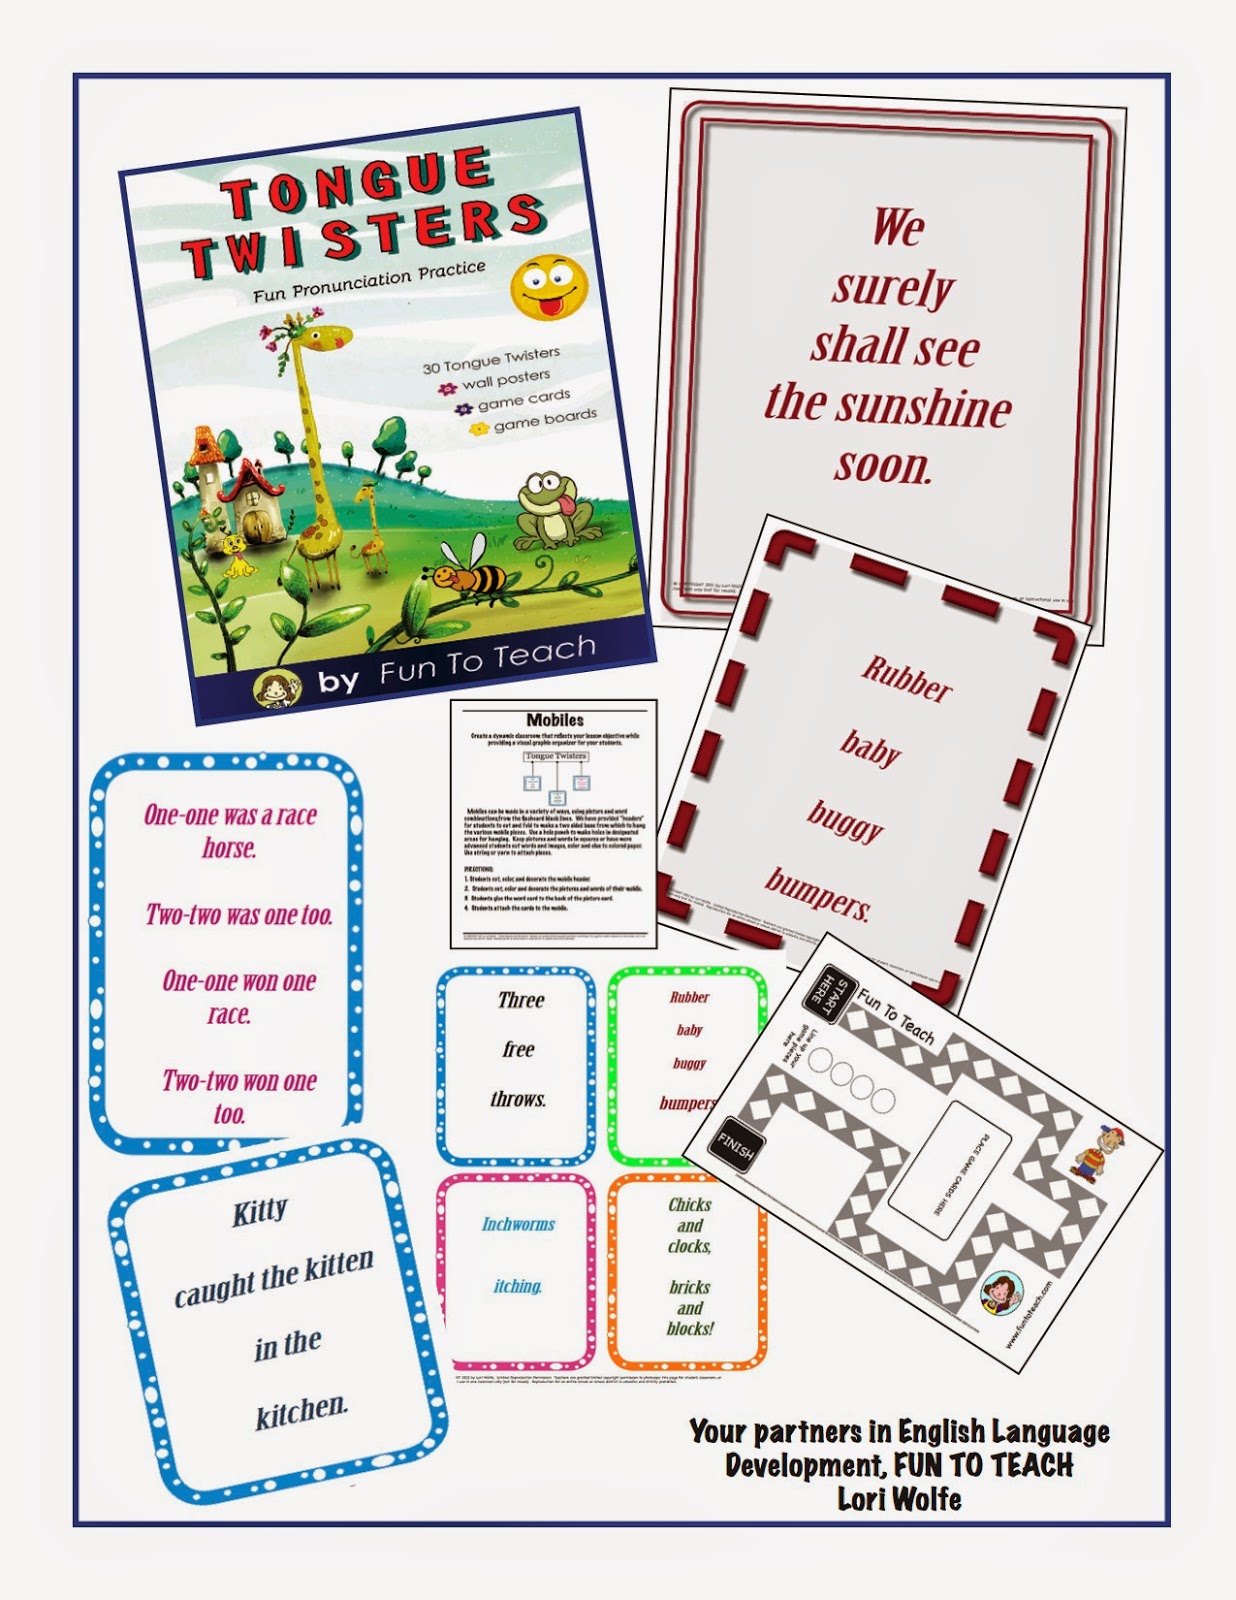 Tongue Twisters Pronunciation Made Fun!  This 48-page pronunciation unit has everything you need to teach students the correct pronunciation necessary to be academically successful in English. Tongue Twisters – Pronunciation Made Fun contains 30 traditional tongue twisters to help elementary students master English pronunciation!  Wall posters and game cards are provided for your students to practice the sounds of English with these engaging tongue twisters.   In addition, our activities and ideas provide fun and interest so your students learn through hands-on experiences. This unit is ready to go to work for you! Tongue Twisters – Pronunciation Made Fun has everything you need to teach students the correct pronunciation including black lines for the 30 traditional tongue twisters as wall posters, game/mobile cards and game boards Each of the 30 tongue twisters has its own wall poster and game card.  Practice English pronunciation with fun activities and game boards.  •WORD WALL CARDS •GAME BOARDS •GAME CARDS  Each tongue twister is printed on an individual wall poster (8 x 11 ½) and game/flash card. Simply copy, cut, and use.  Use this great English pronunciation package for kindergarten through 6th graders.  Perfect for second language learners and speech students!  See all our great math and grammar games at www.funtoteach.com.